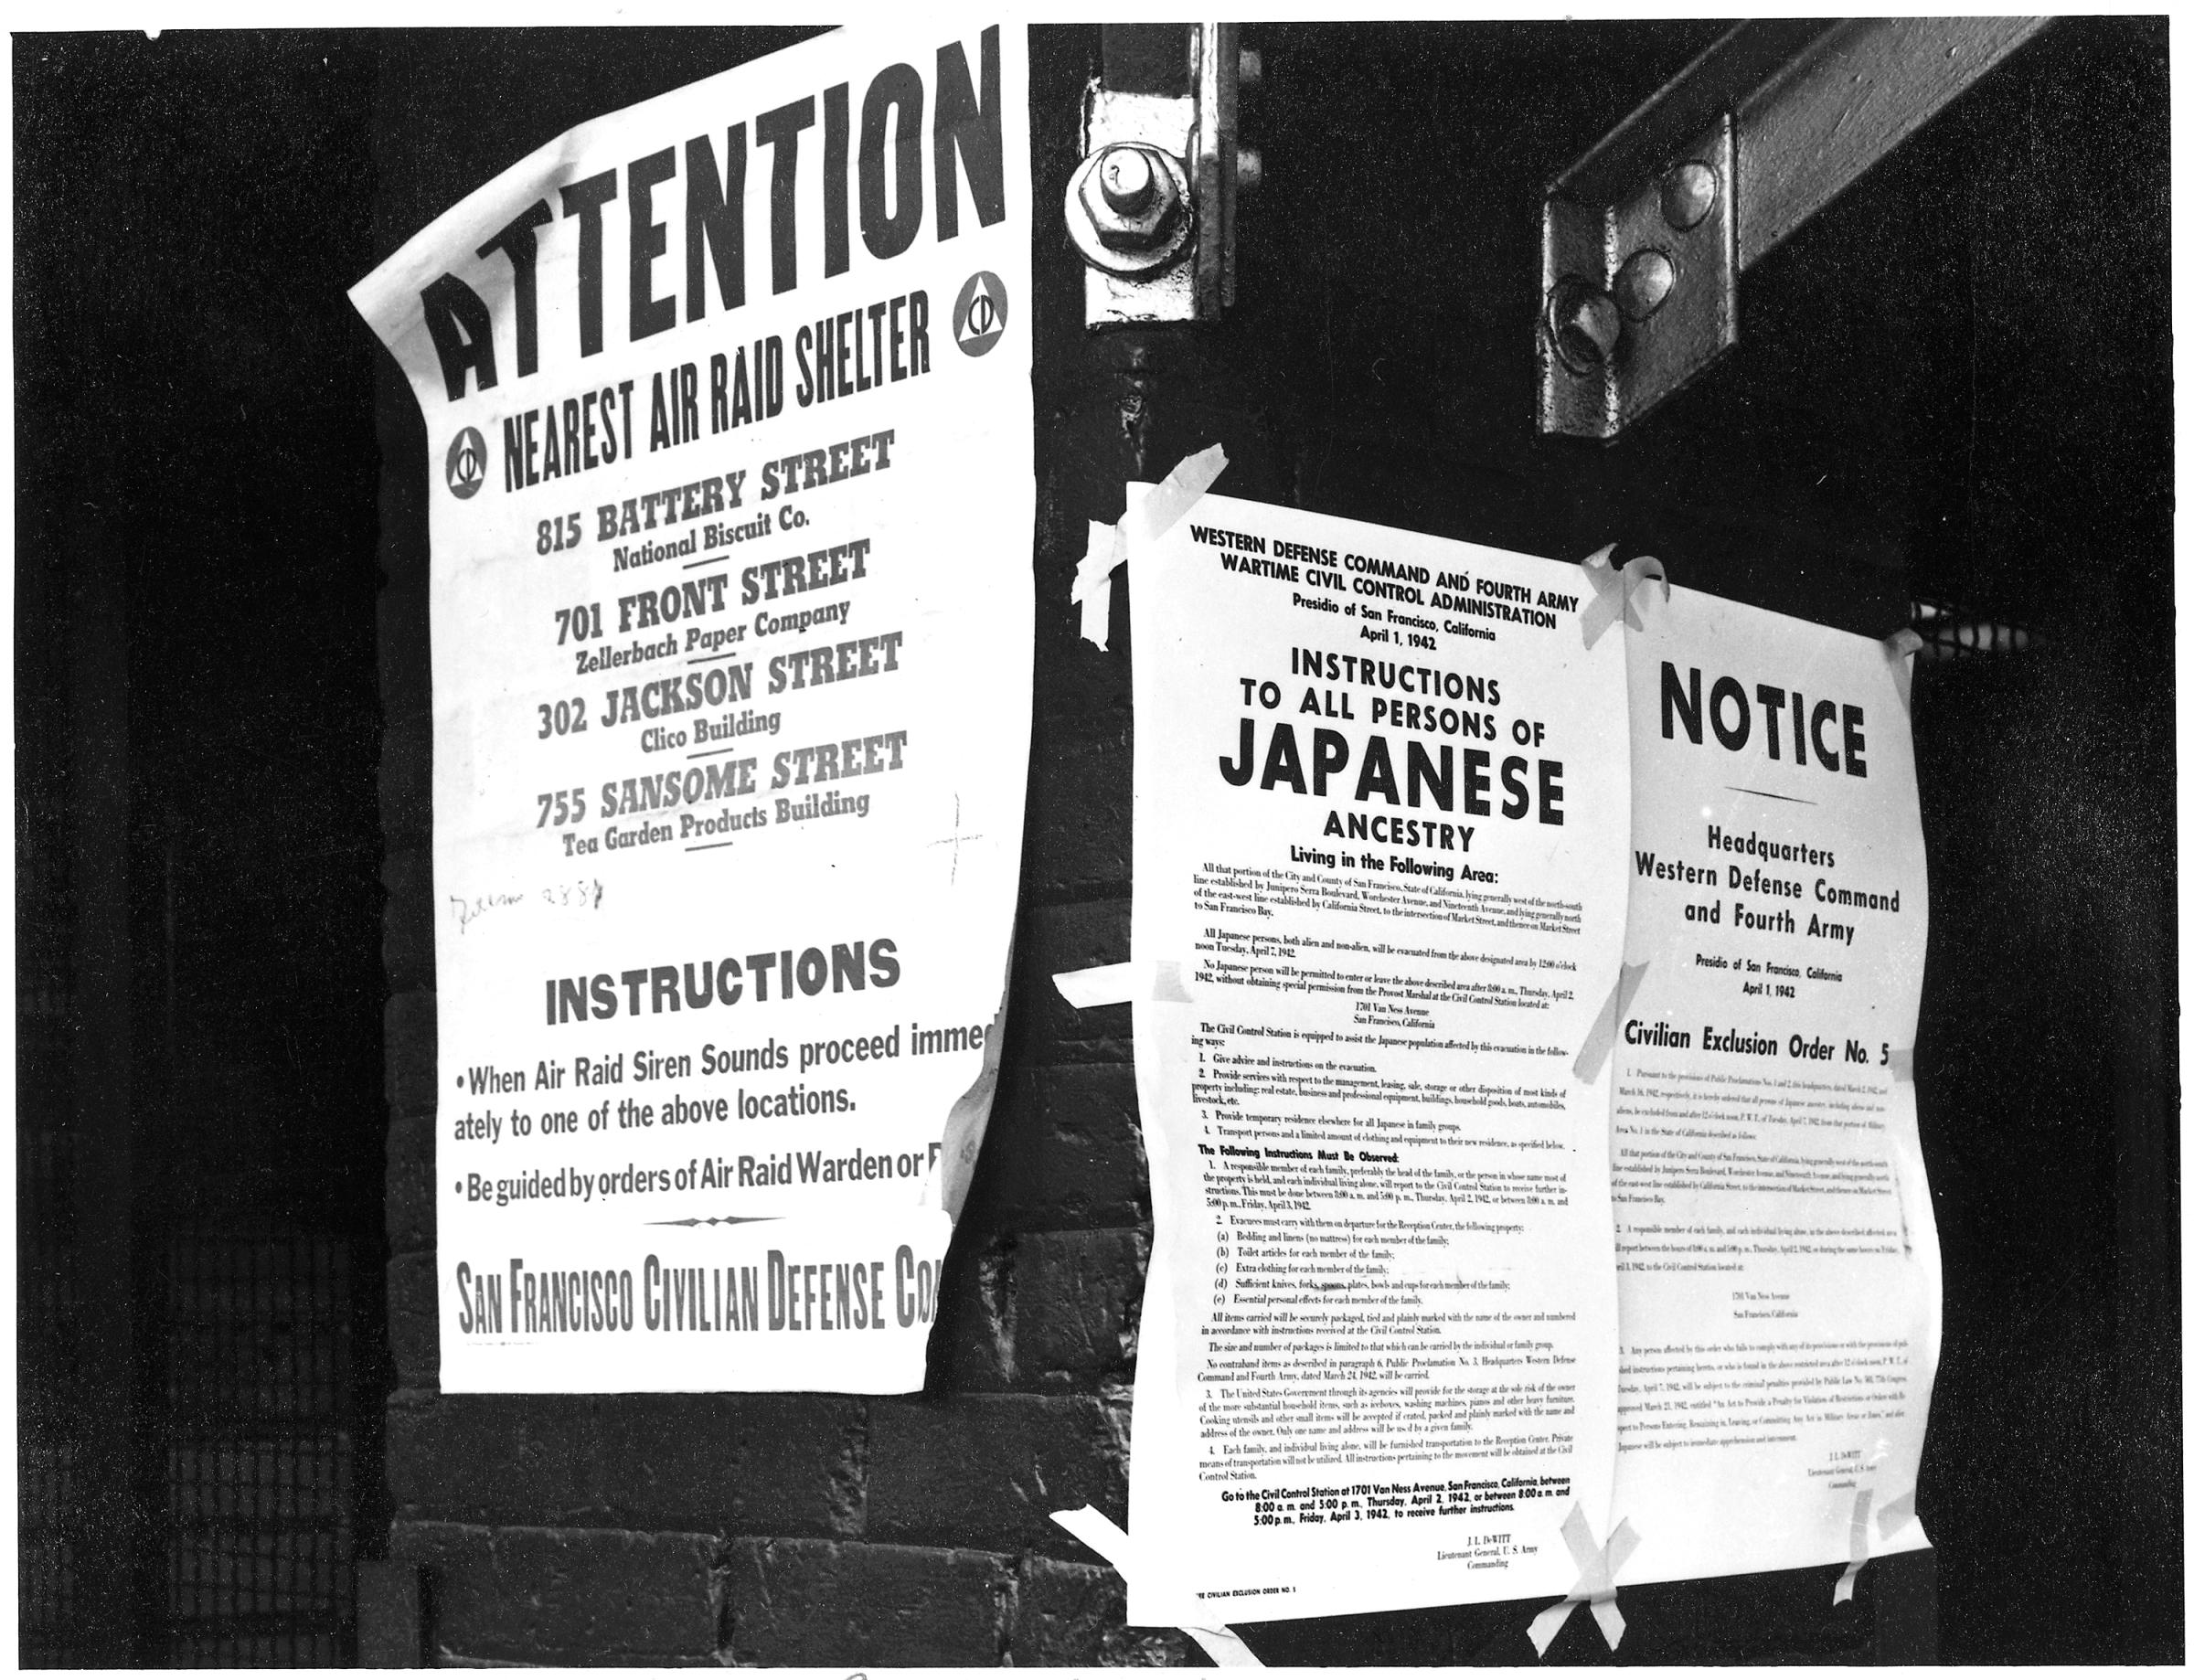 San Francisco, California. On a brick wall beside air raid shelter poster, exclusion orders were posted at First and Front Streets directing removal of persons of Japanese ancestry from first San Francisco section to be affected by evacuation.